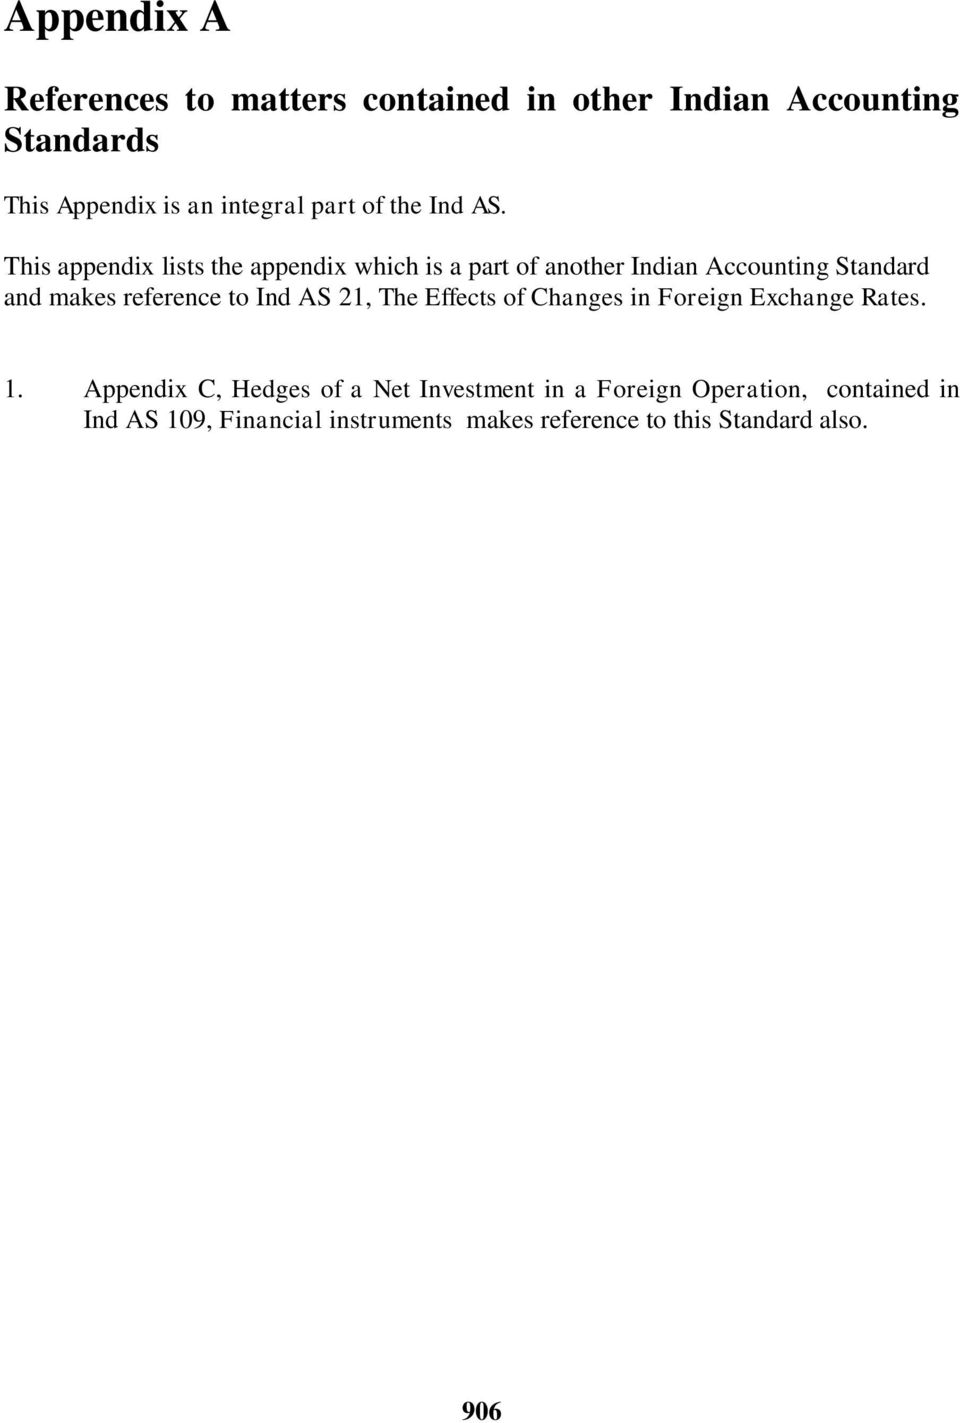 This appendix lists the appendix which is a part of another Indian Accounting Standard and makes reference to Ind